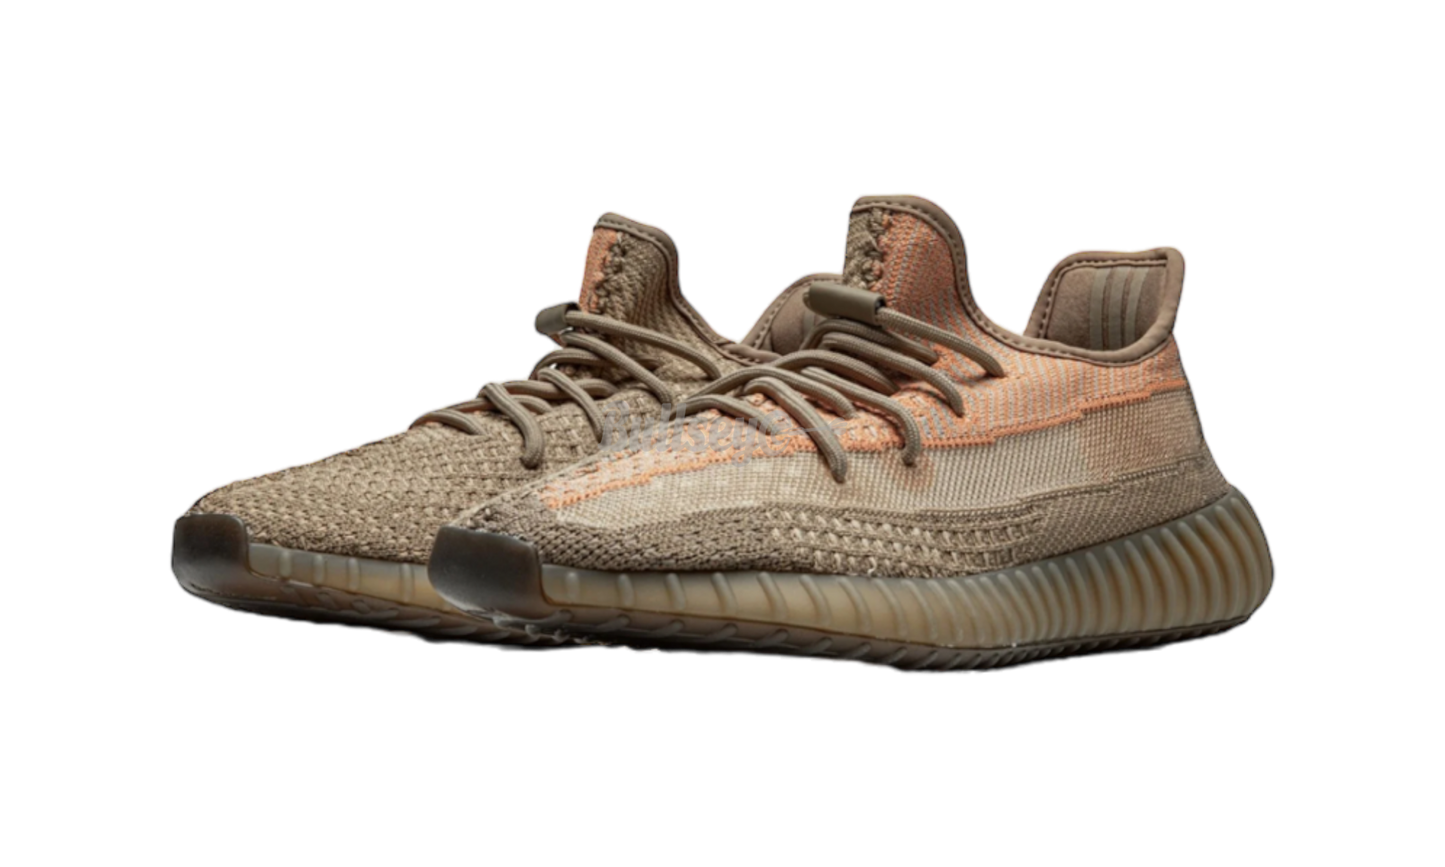 Adidas Yeezy Boost 350 "Sand Taupe"